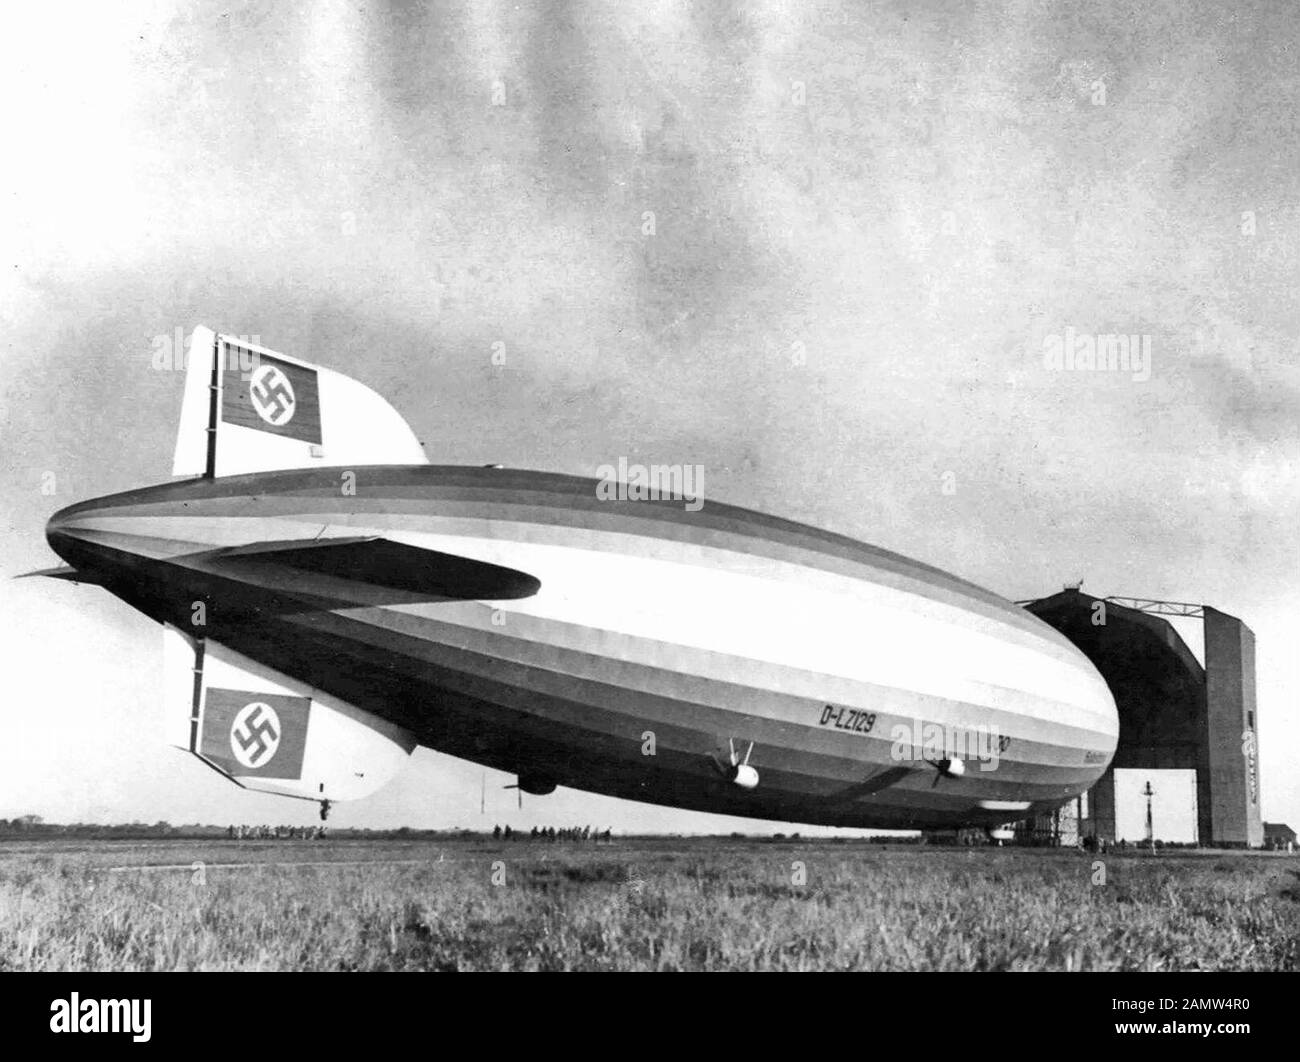 Photo of the Hindenburg entering the airship hangar at Santa Cruz, Rio De Janiero, Brazil, following its first transatlantic crossing in April of 1936. Note the temporary tail fin repair after the fin was damaged during a propaganda flight in Germany on March 26, 1936. Stock Photo